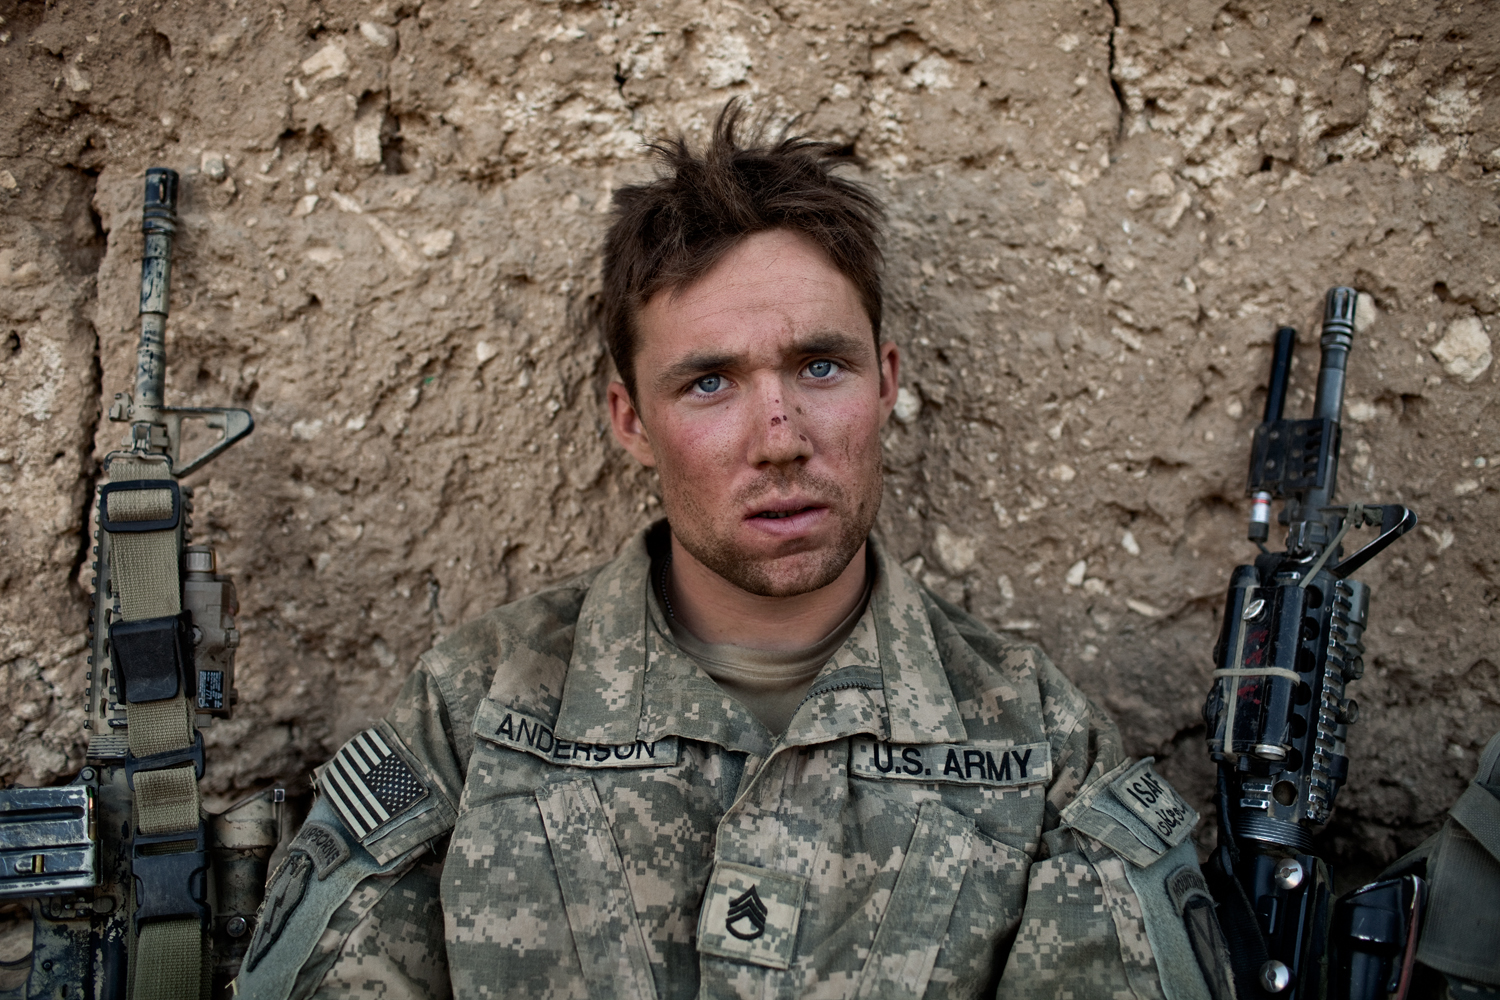  U.S. Army Sergeant Cody Anderson during an operation in the Tangi Valley, Wardak Province, Afghanistan. Anderson died after returning from Afghanistan.    